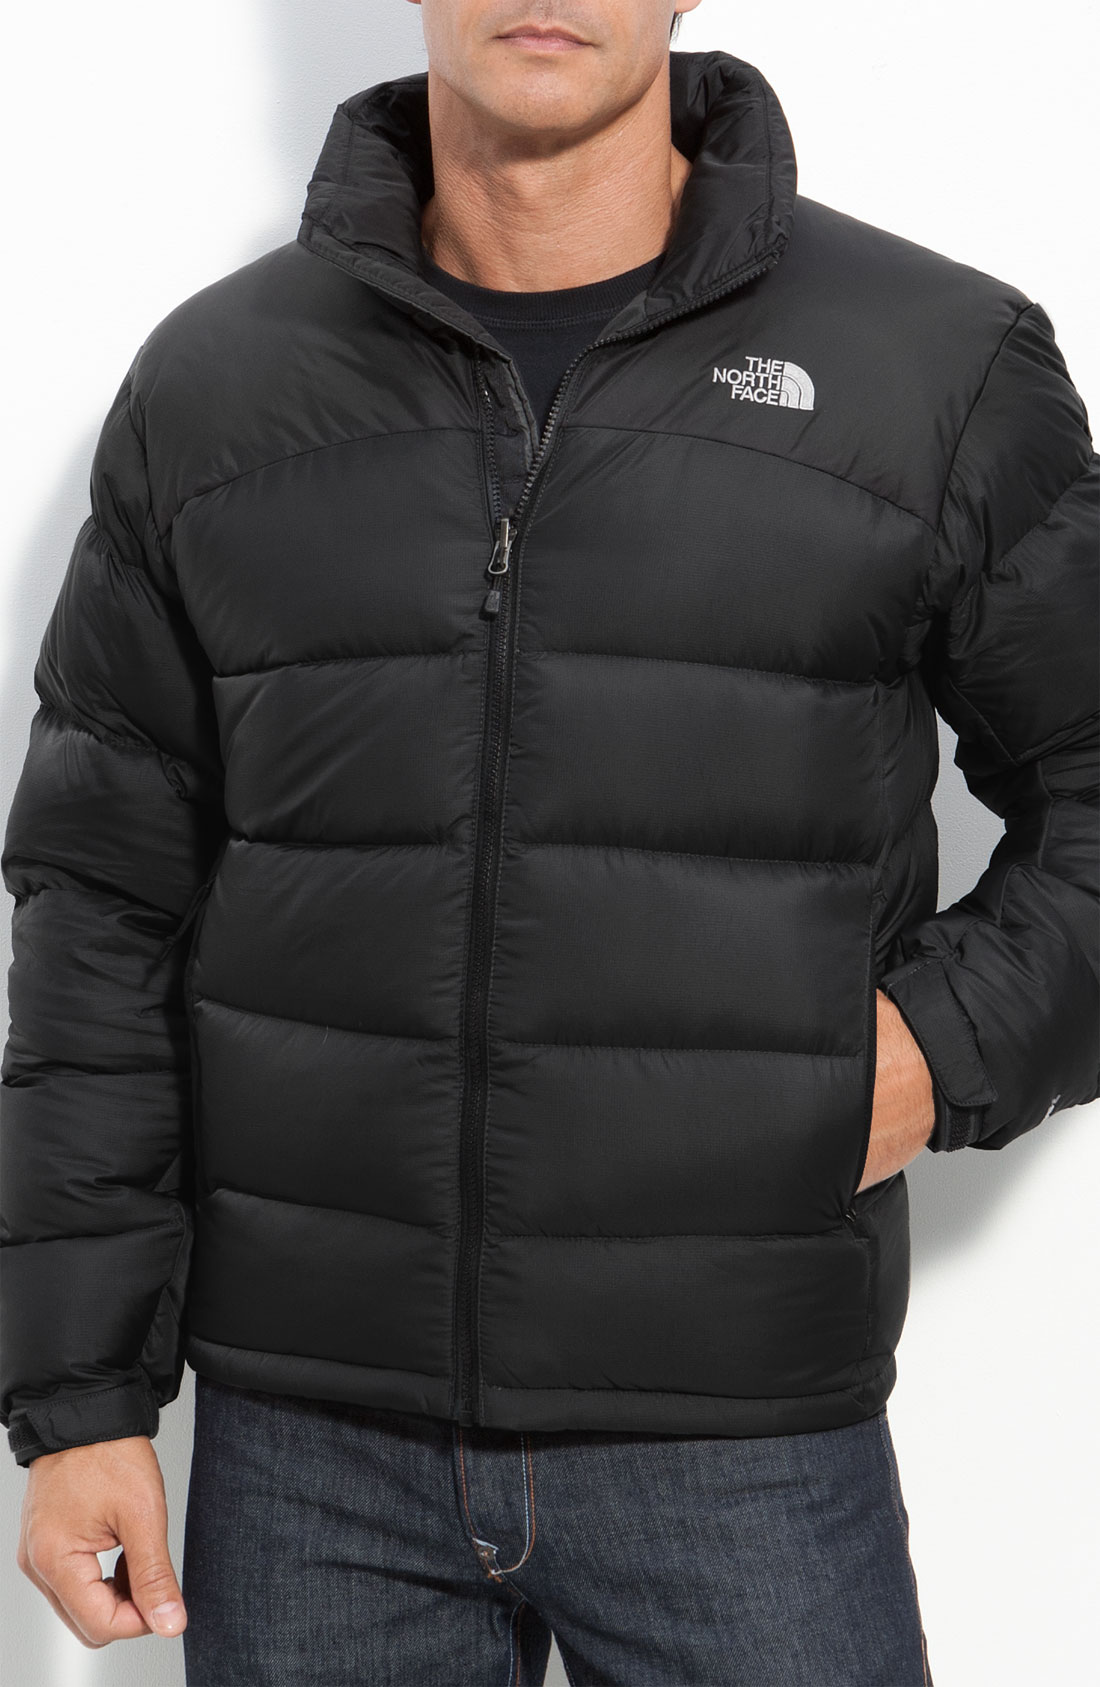 north face mens puffer jacket